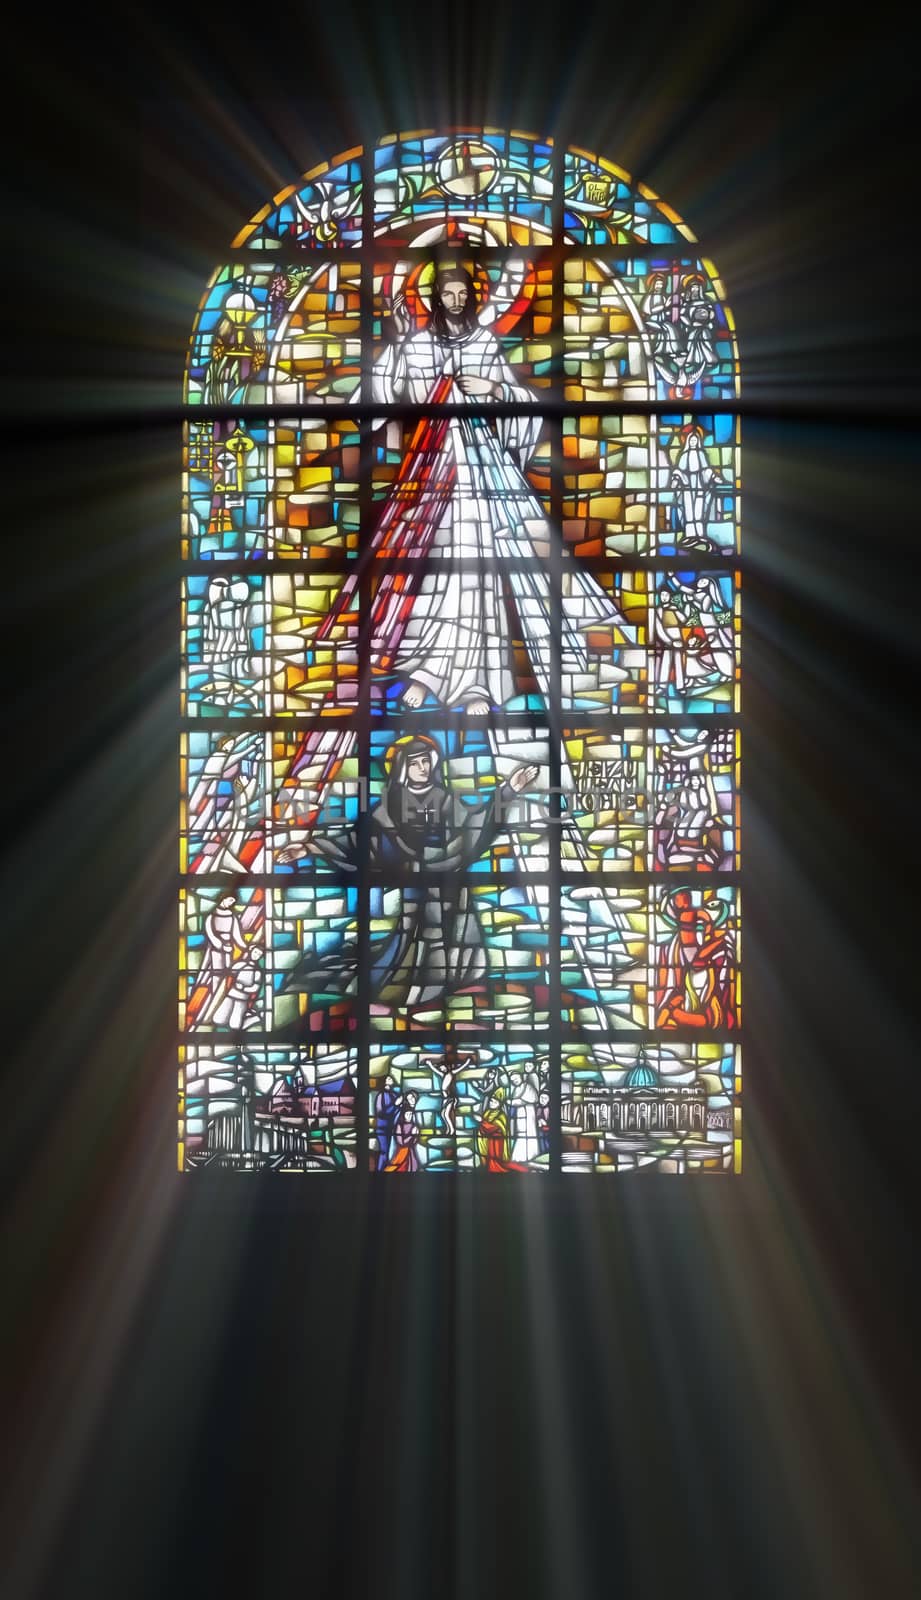 Biblical stained glass with rays of light shining through by Attila